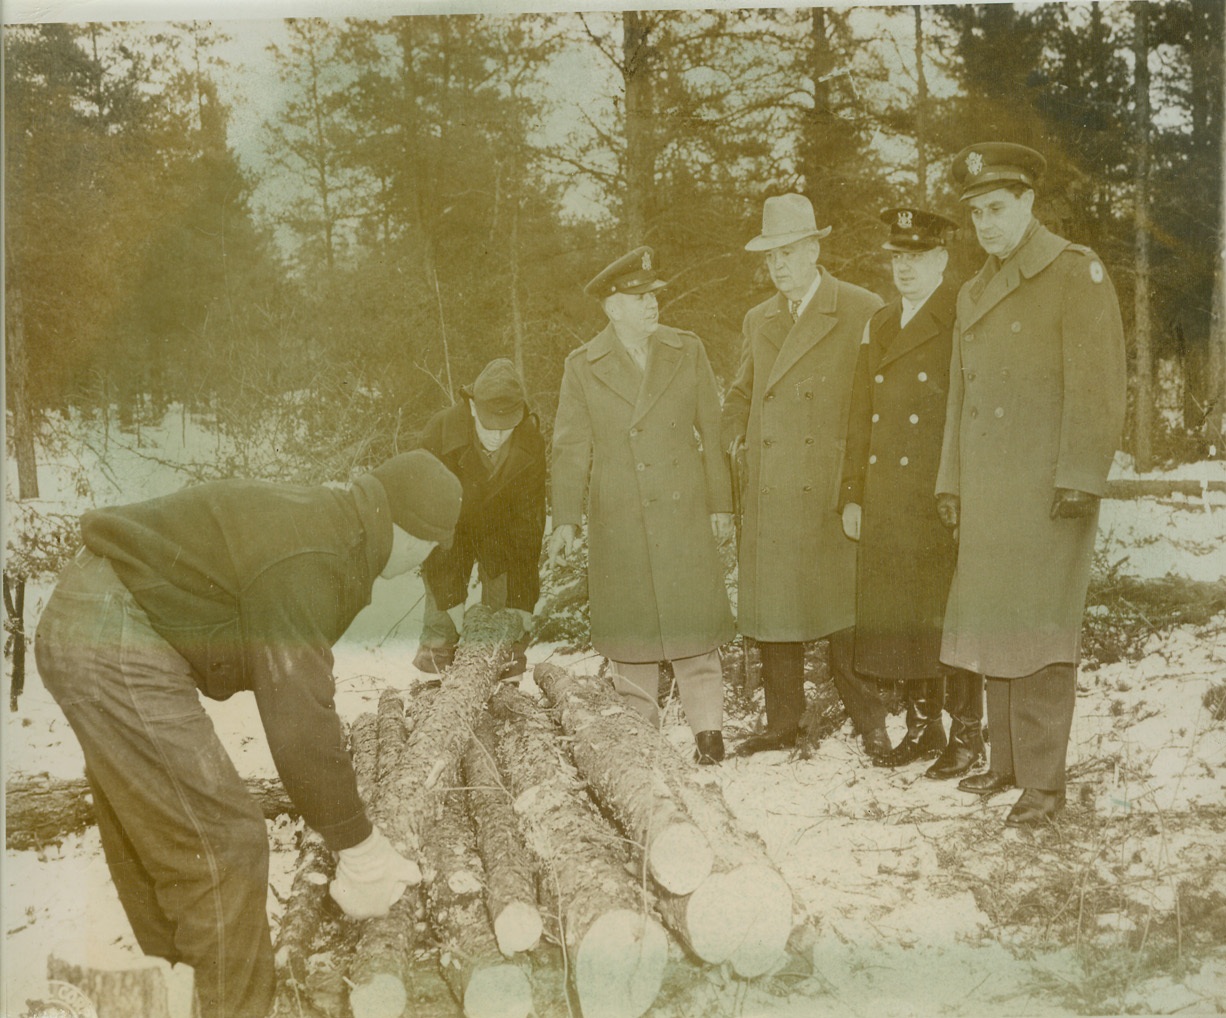 NAZIS HELP OUT IN NORTH WOODS, 3/12/1944. CAMP EVELYN, MICH. – Several hundred German prisoners from Rommel’s Afrika Korps have been brought to two former CCC camps in Northern Michigan near Evelyn and Sadinaw where they will learn the use of the double-bitted Michigan ax and the two-man saw with which they will cut pulp and chemical wood in this critical manpower shortage area. Geneva Conference provisions forbid prisoner of war participation in hazardous work, so these men will engage in less dangerous, but still necessary operations. Col. W.H. McCarty, Gov. H.F. Kelly, Michigan Police Commissioner Oscar G. Olander and Col. S.D. Ringsdorf (left to right) inspect logs cut by prisoners of war at Camp Evelyn, Mich. Credit: U.S. Army photo via OWI Radiophoto from ACME;